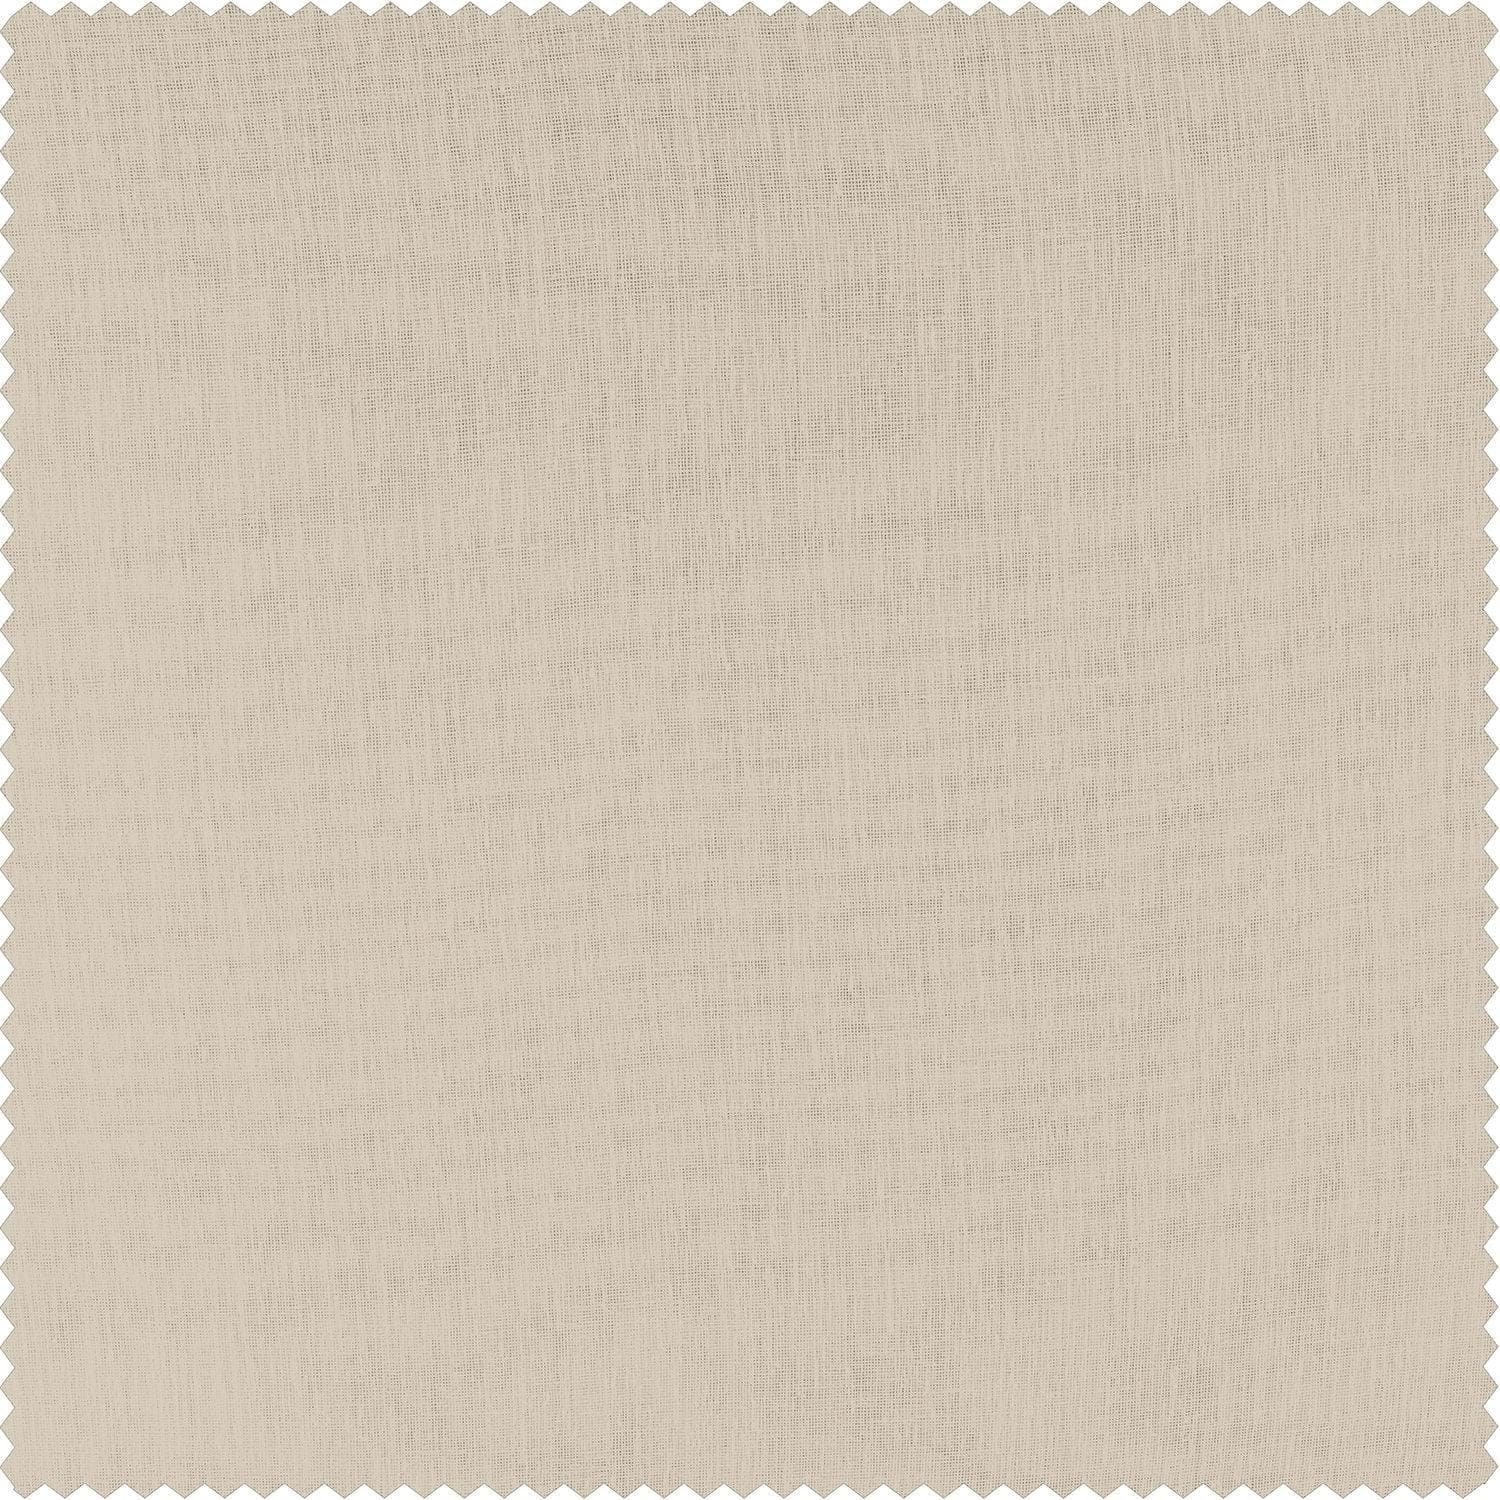 Cotton Seed Textured Faux Linen Swatch